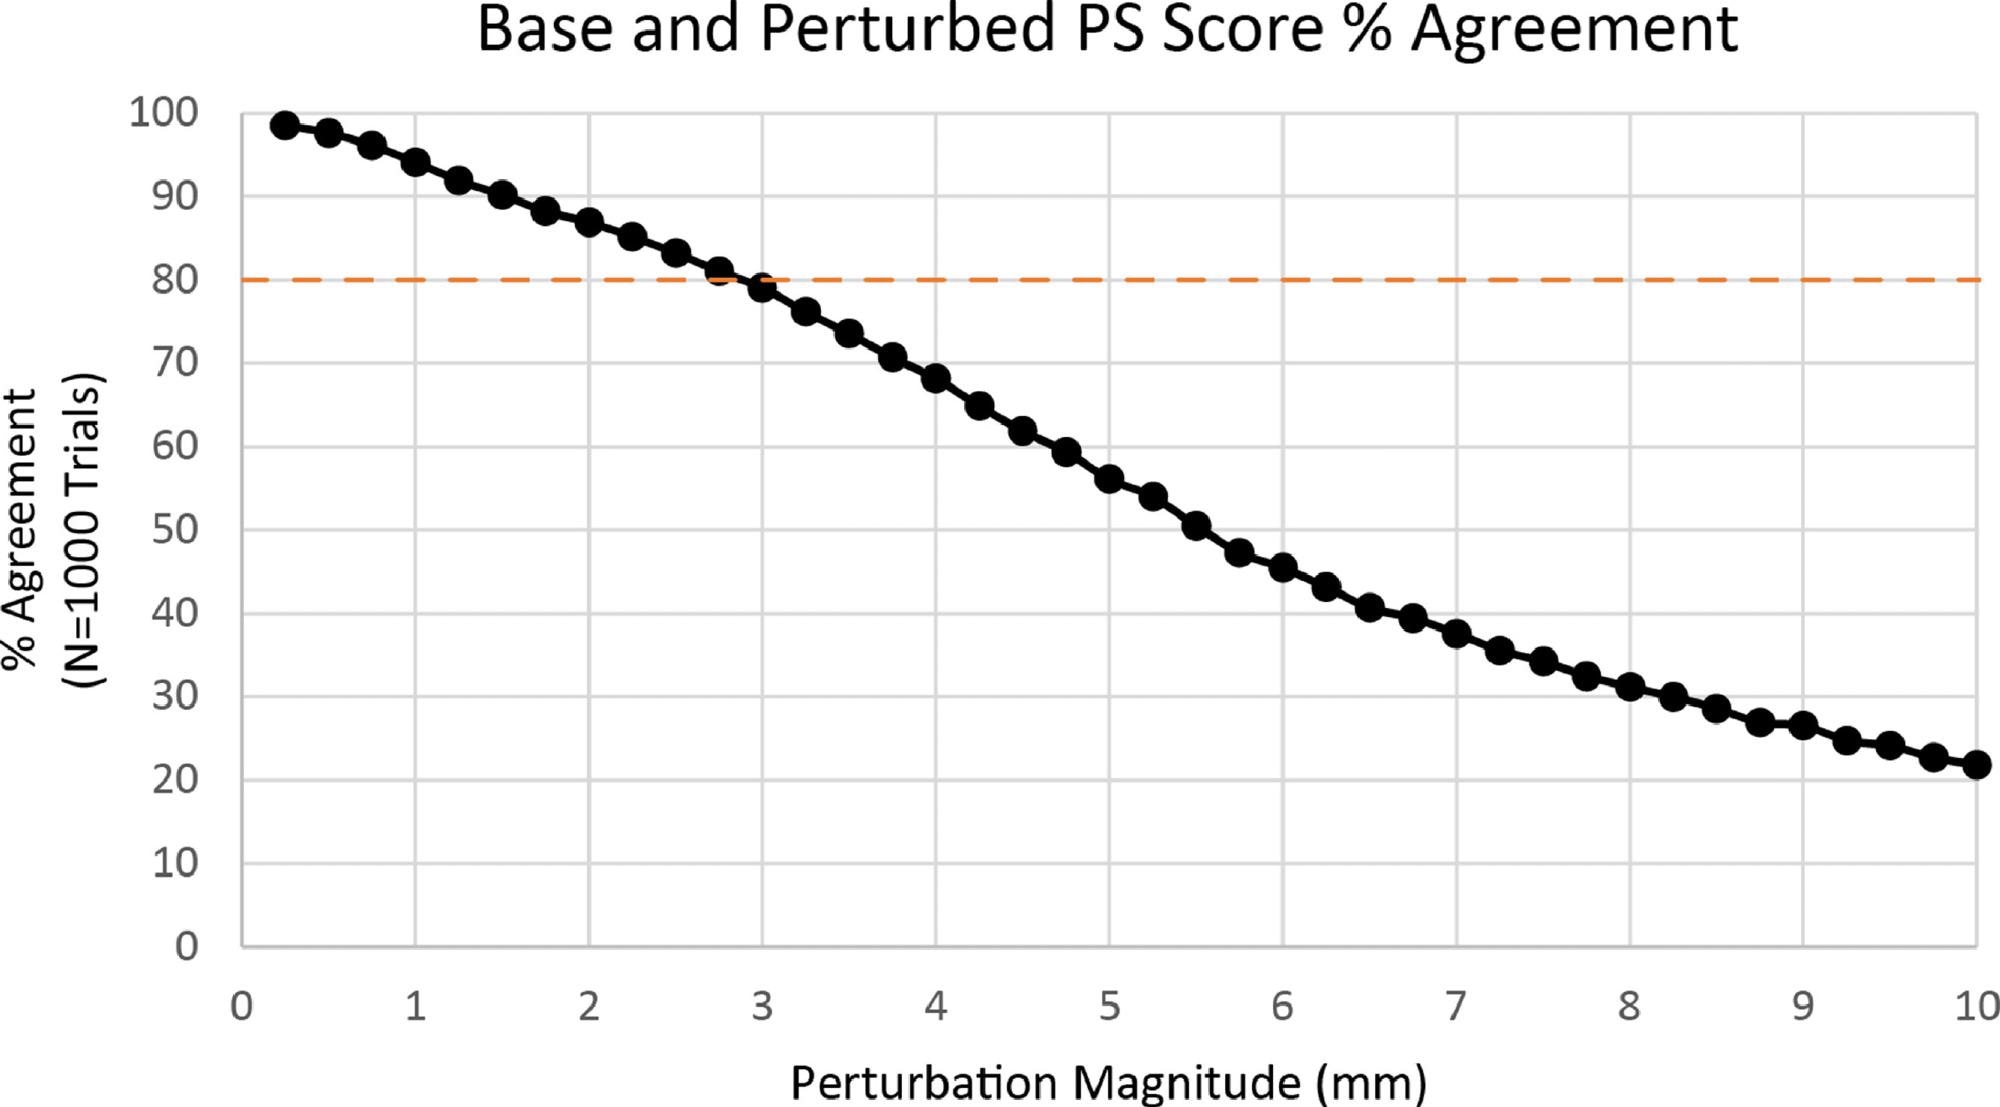 Percent agreement between base PS score and perturbed PS score.